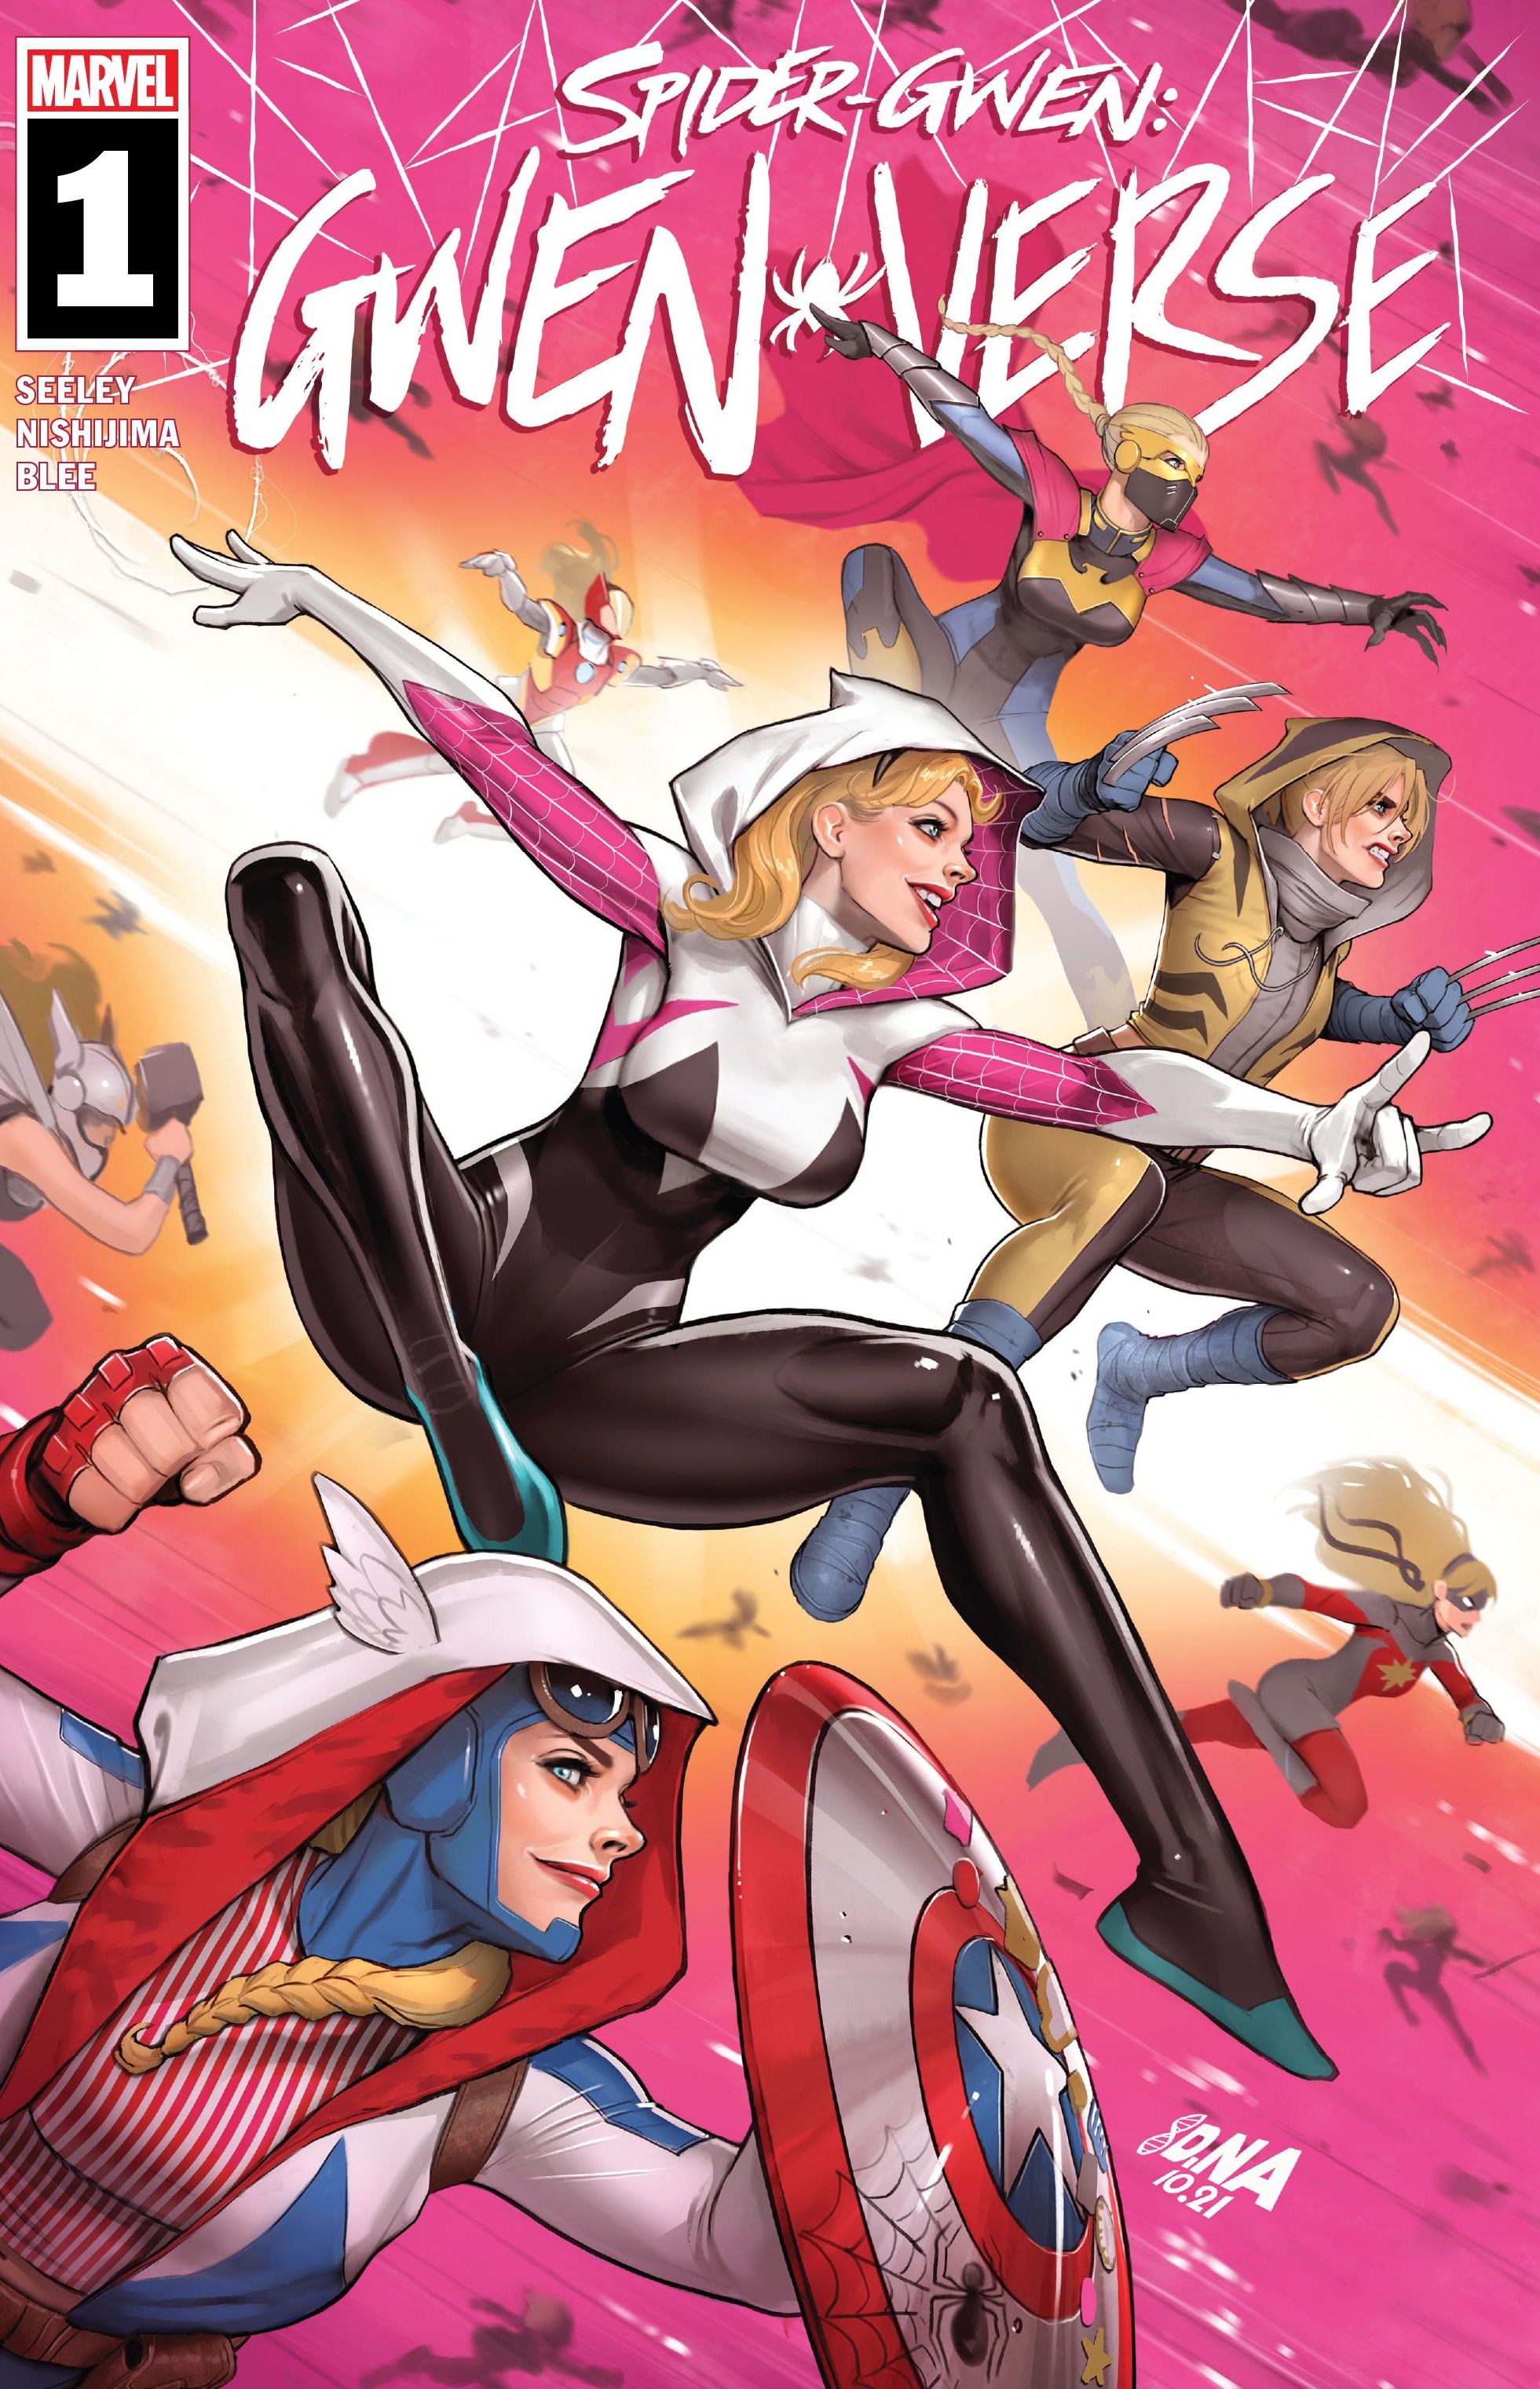 Different versions of Gwen Stacy on the cover of Gwenverse #1